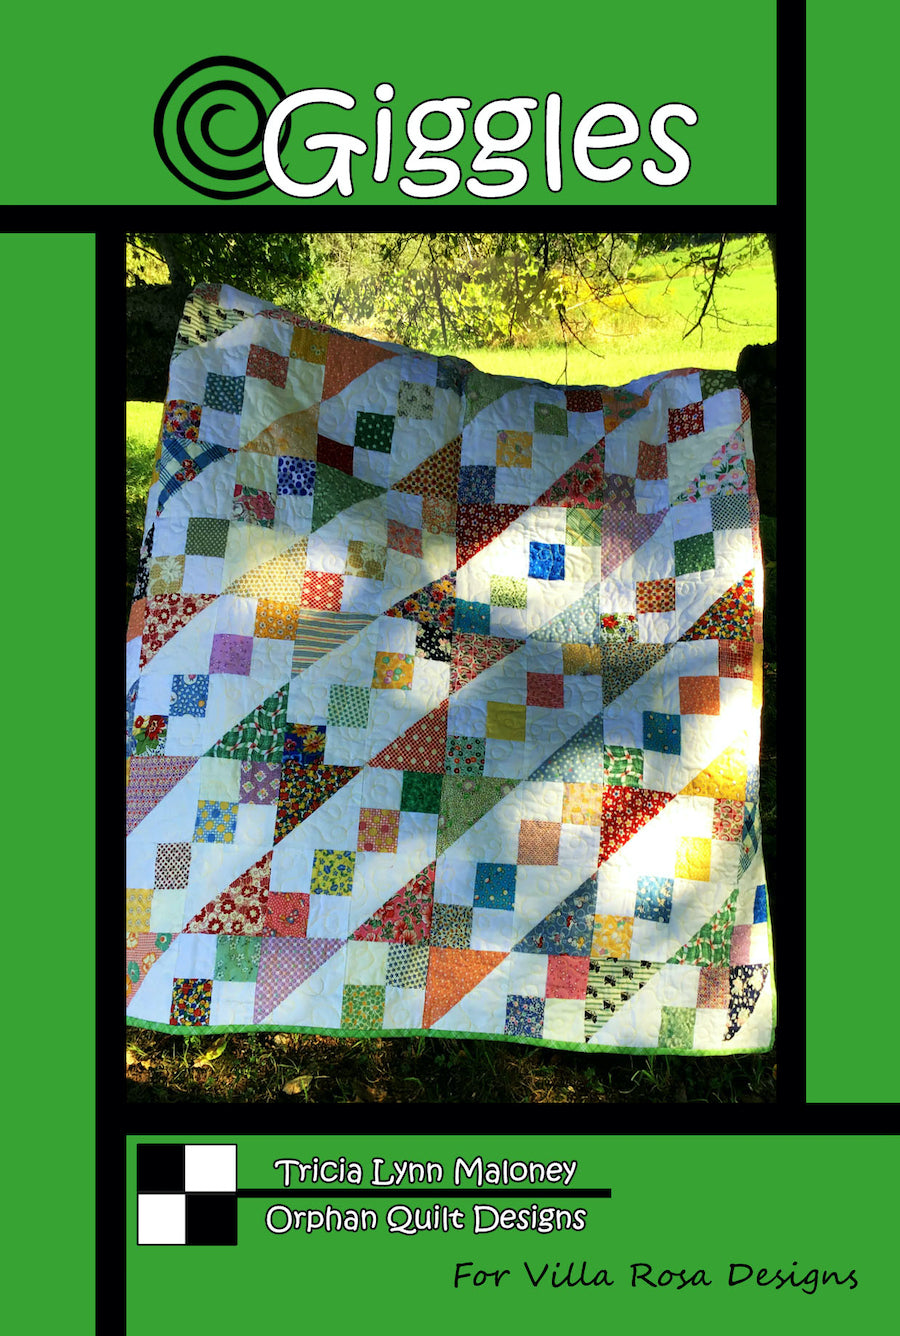 Giggles PDF Quilt Pattern by Villa Rosa Designs